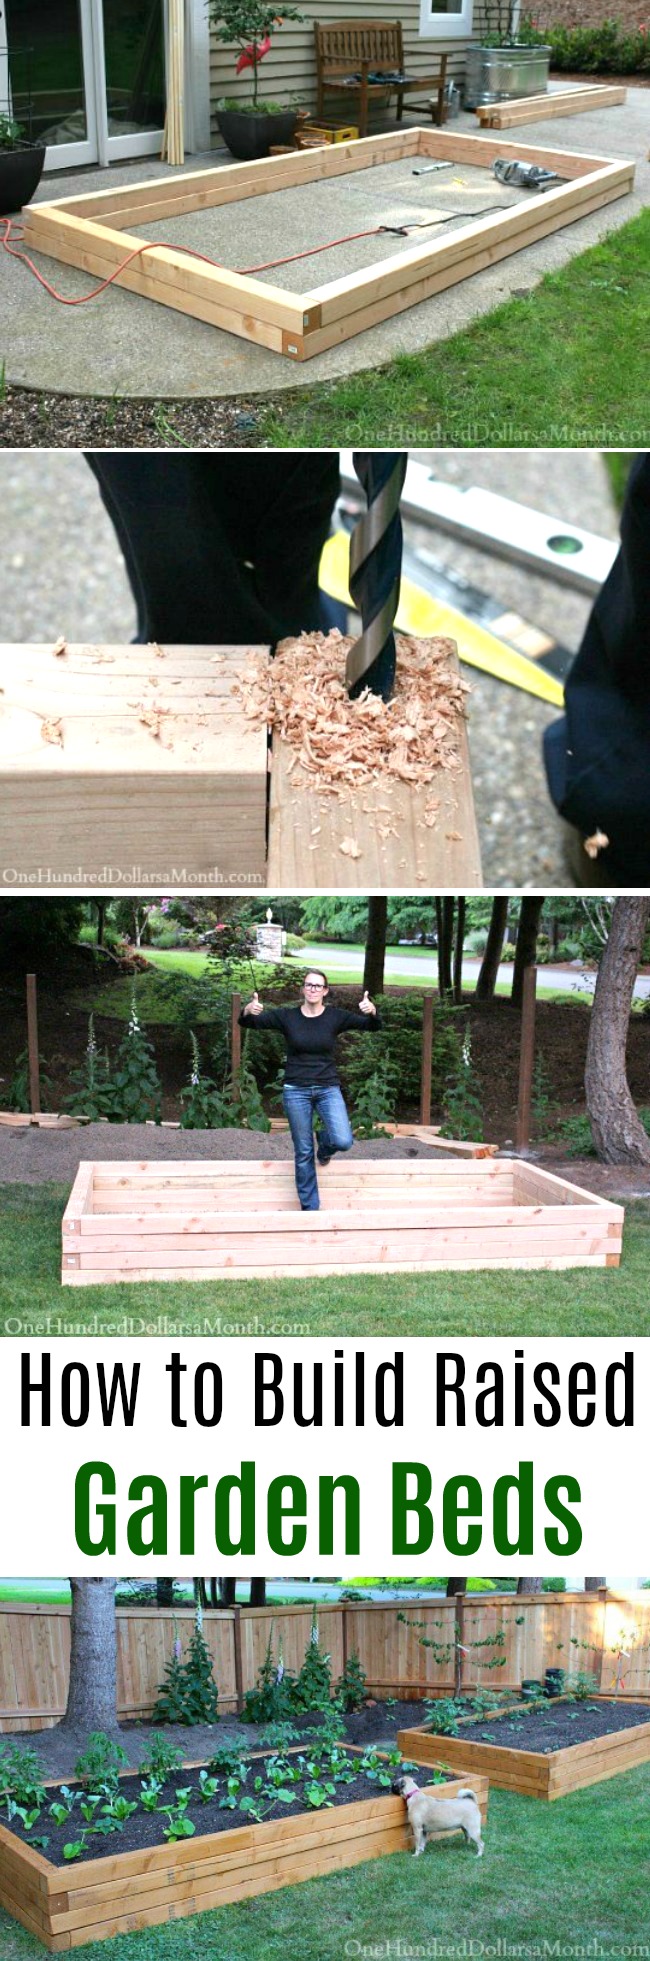 How to Build Raised Garden Beds for Growing Vegetables